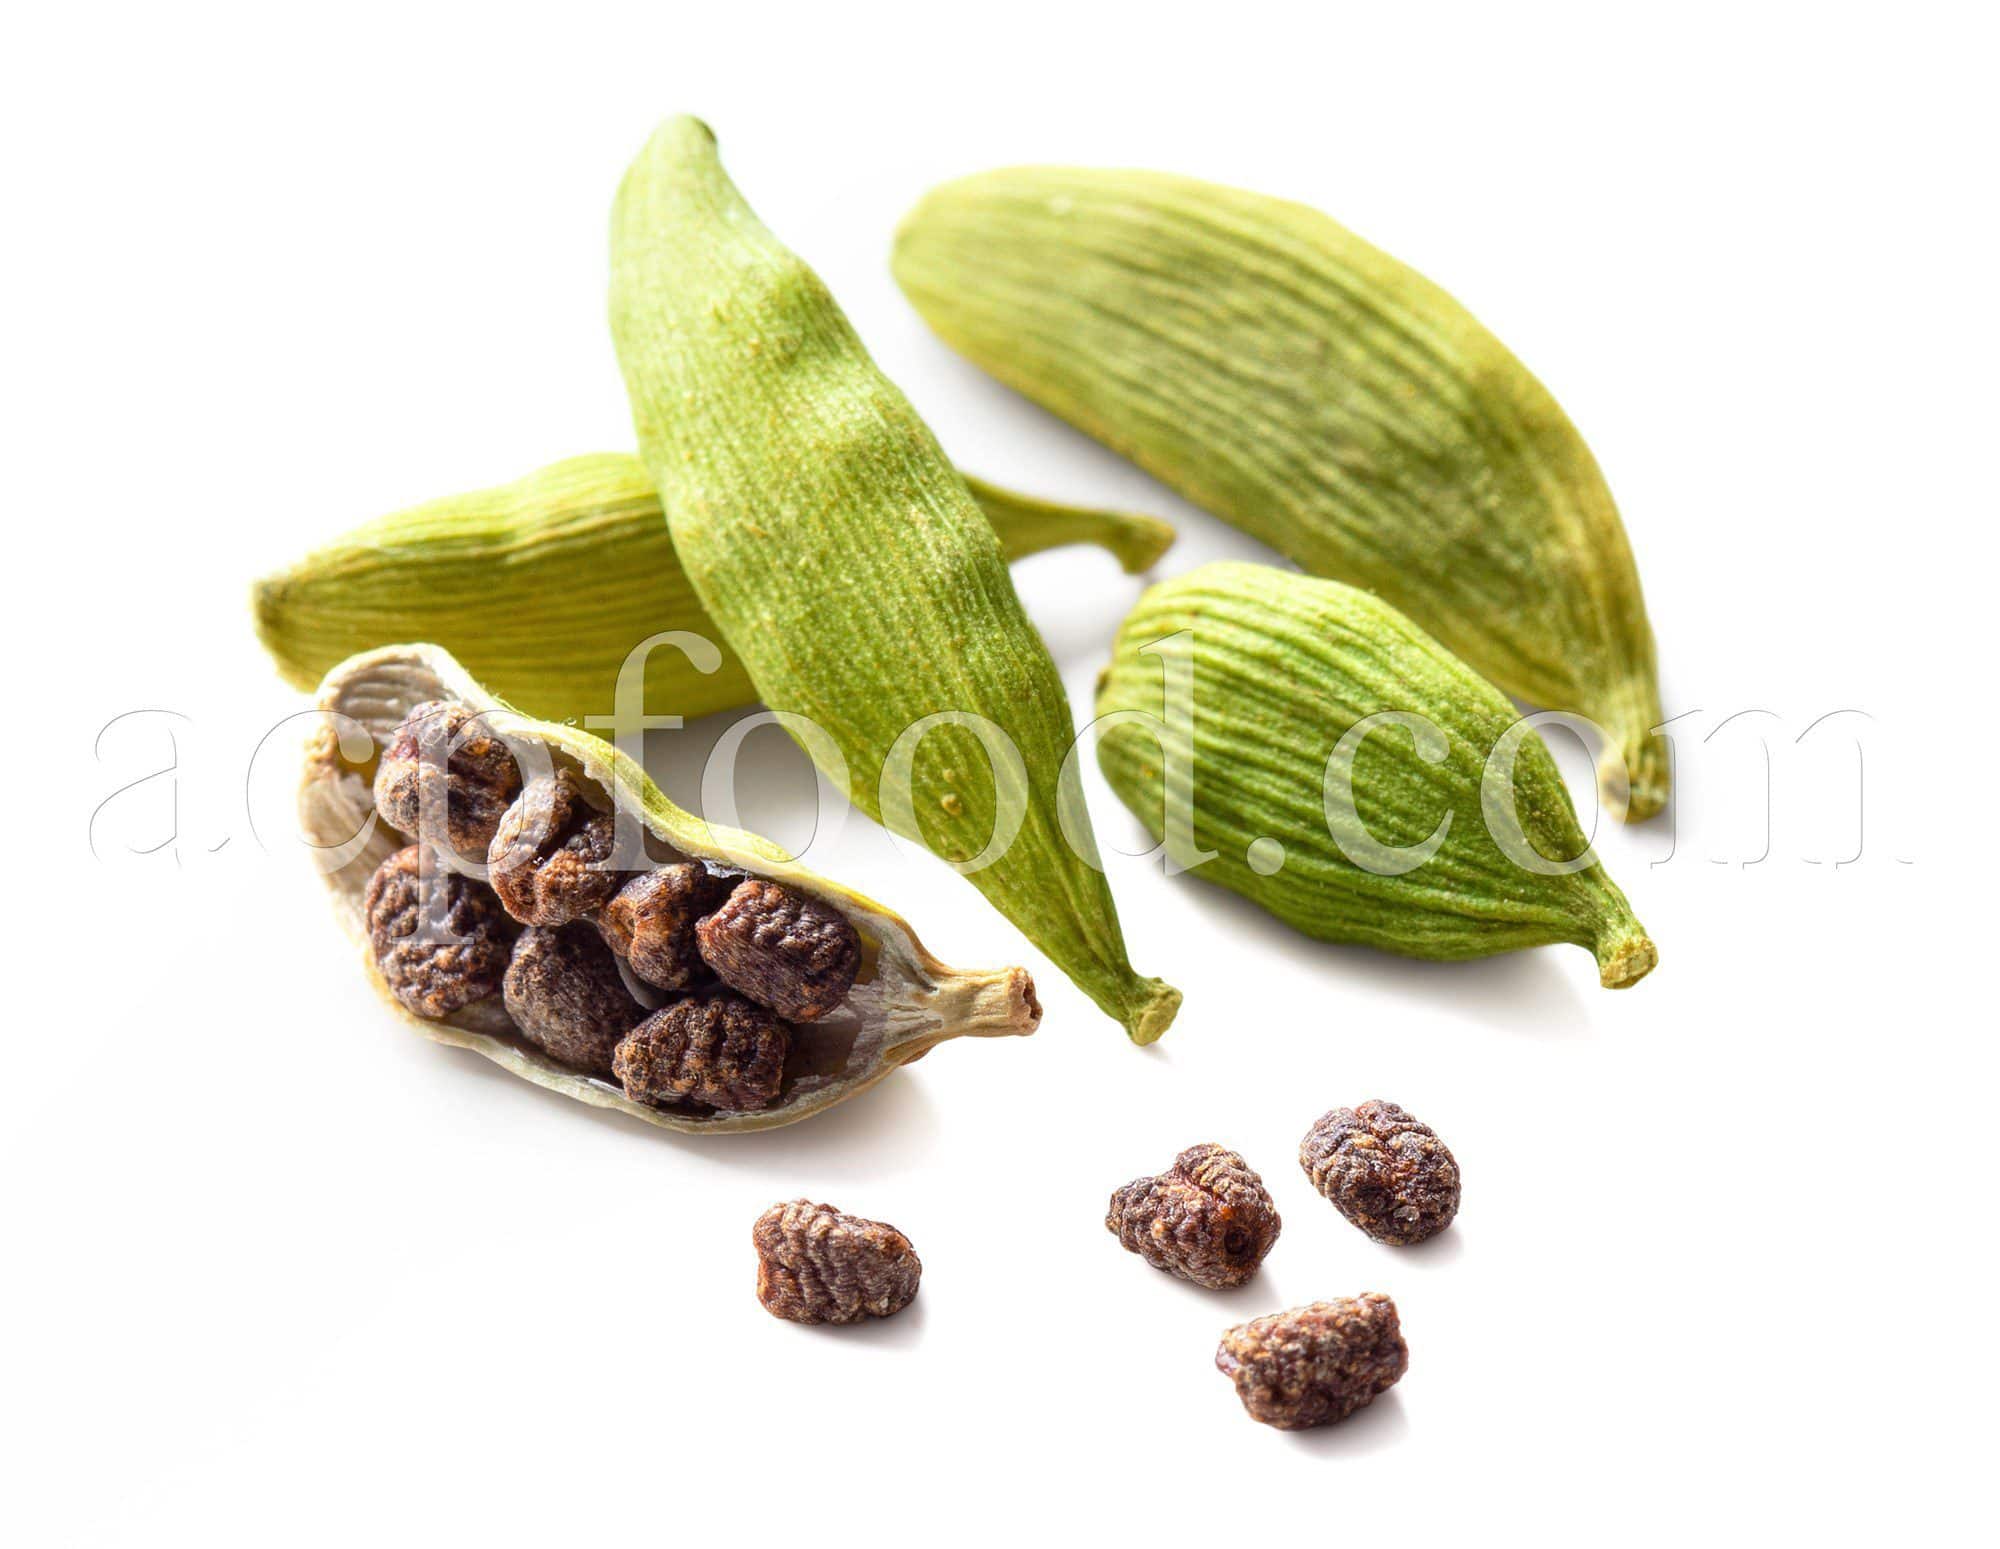 Herbs and fruits which can brighten you up. Cardamom